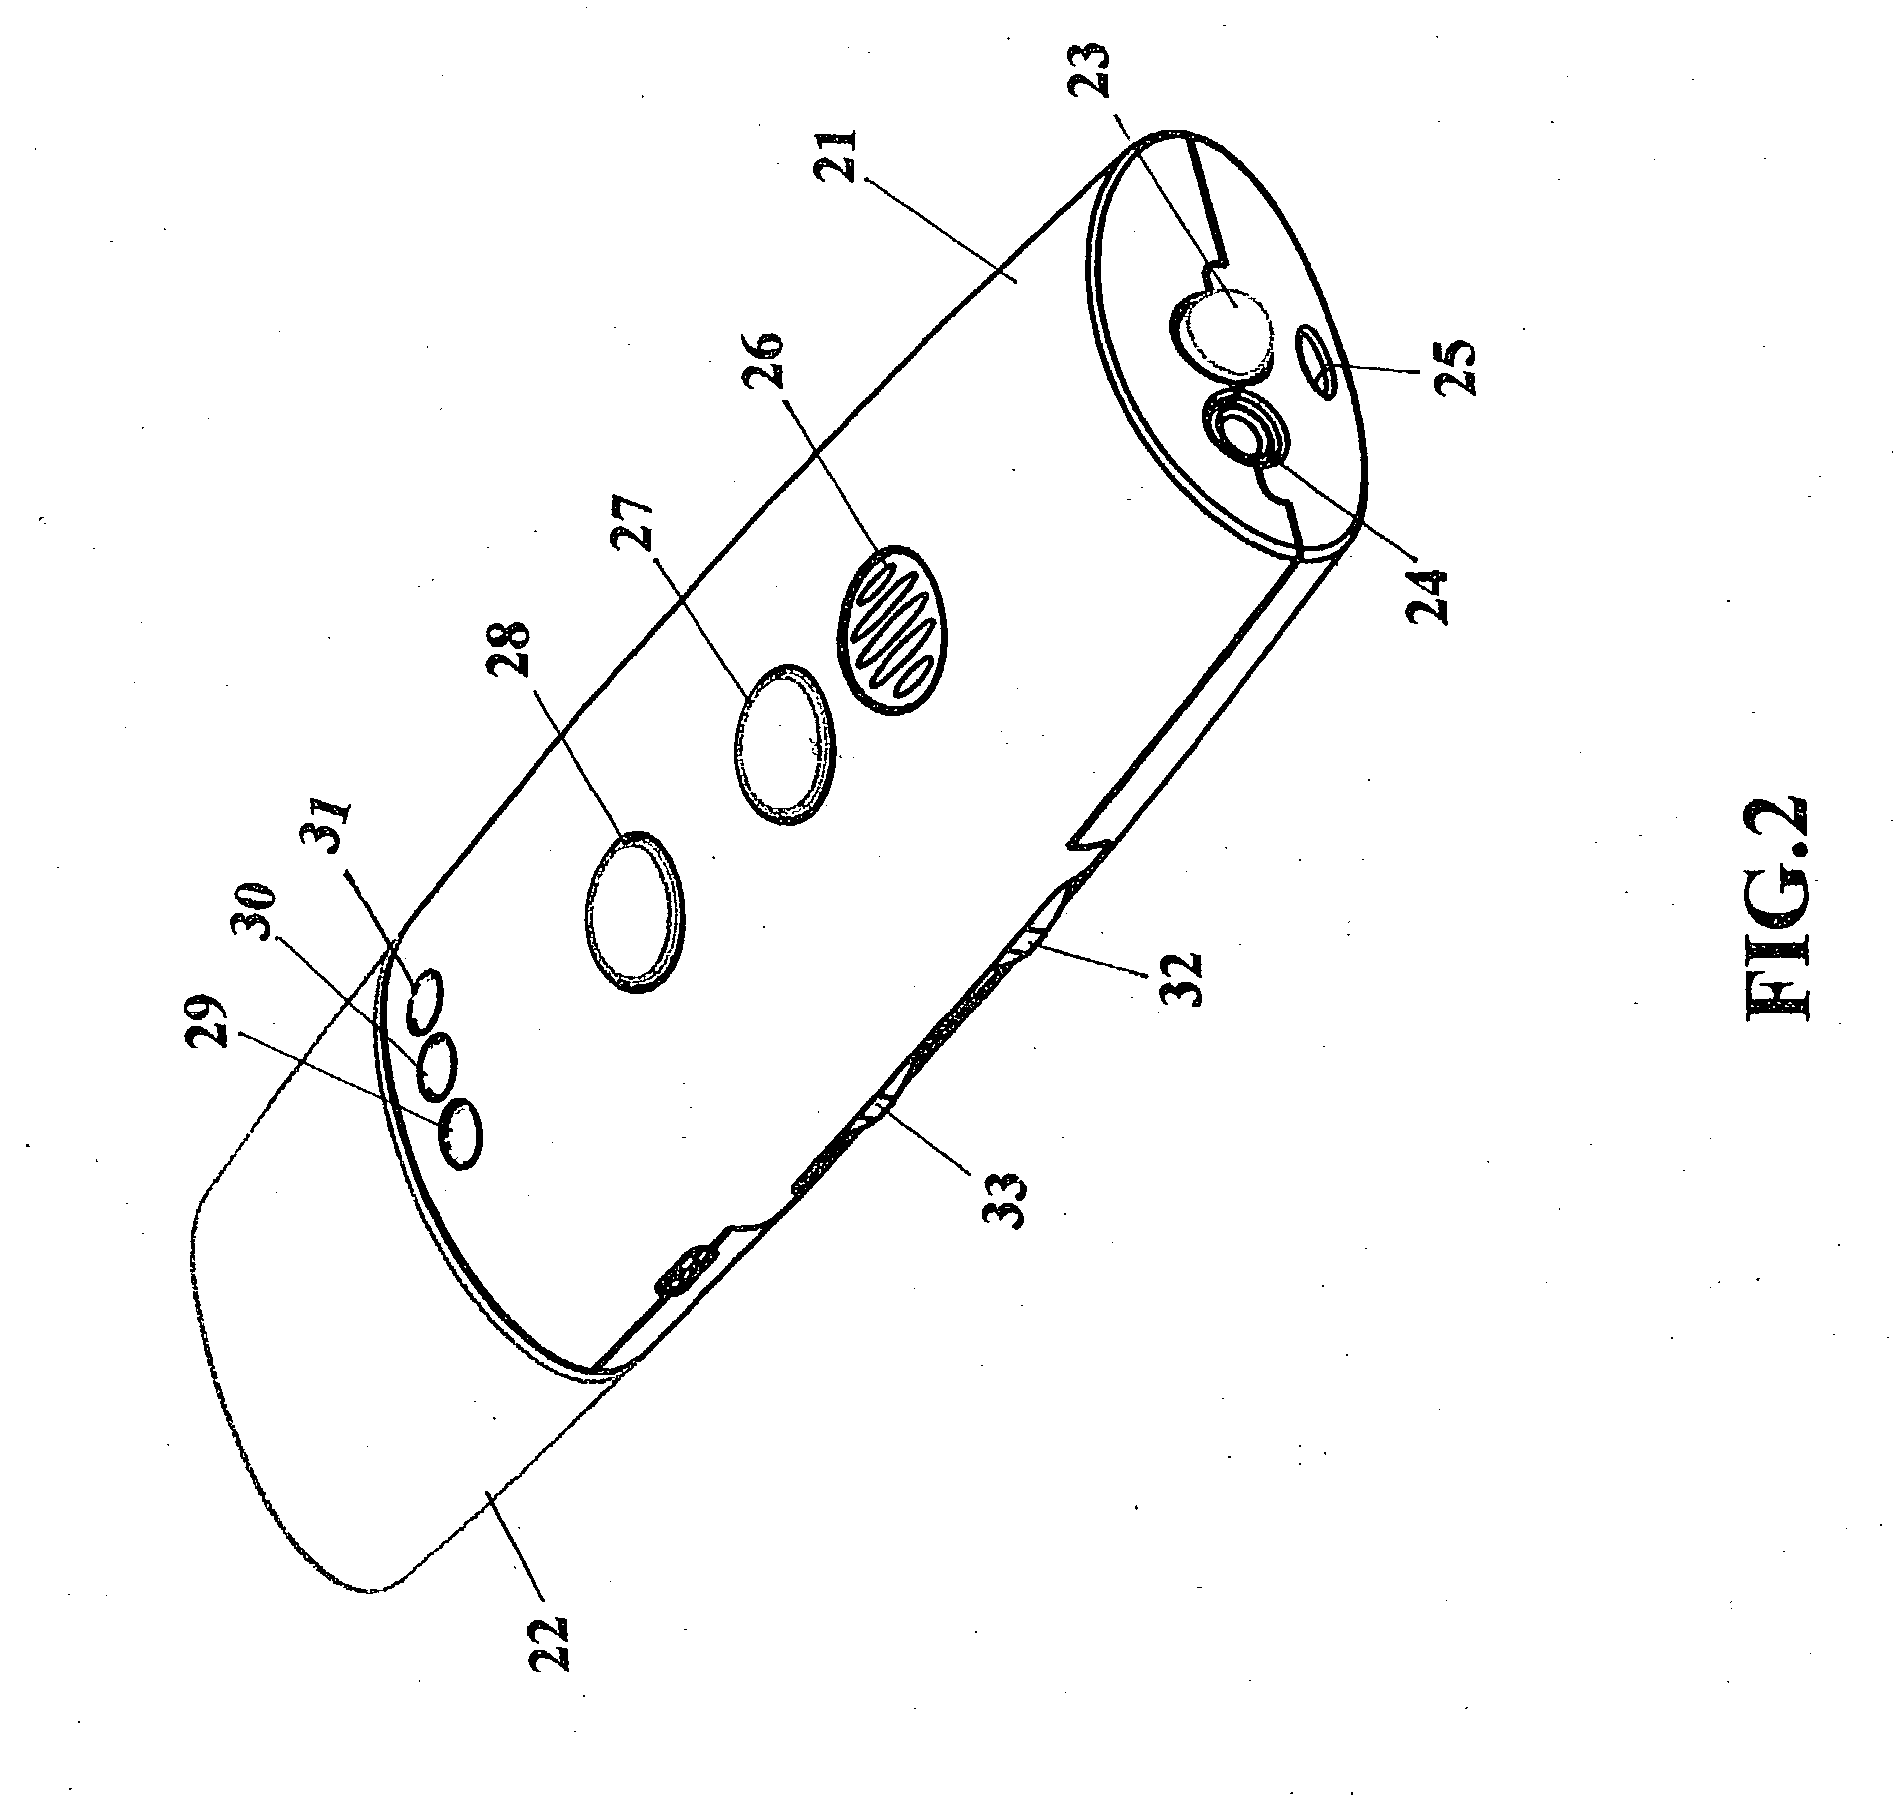 Structure of a multi-purpose thump-like hard disk device